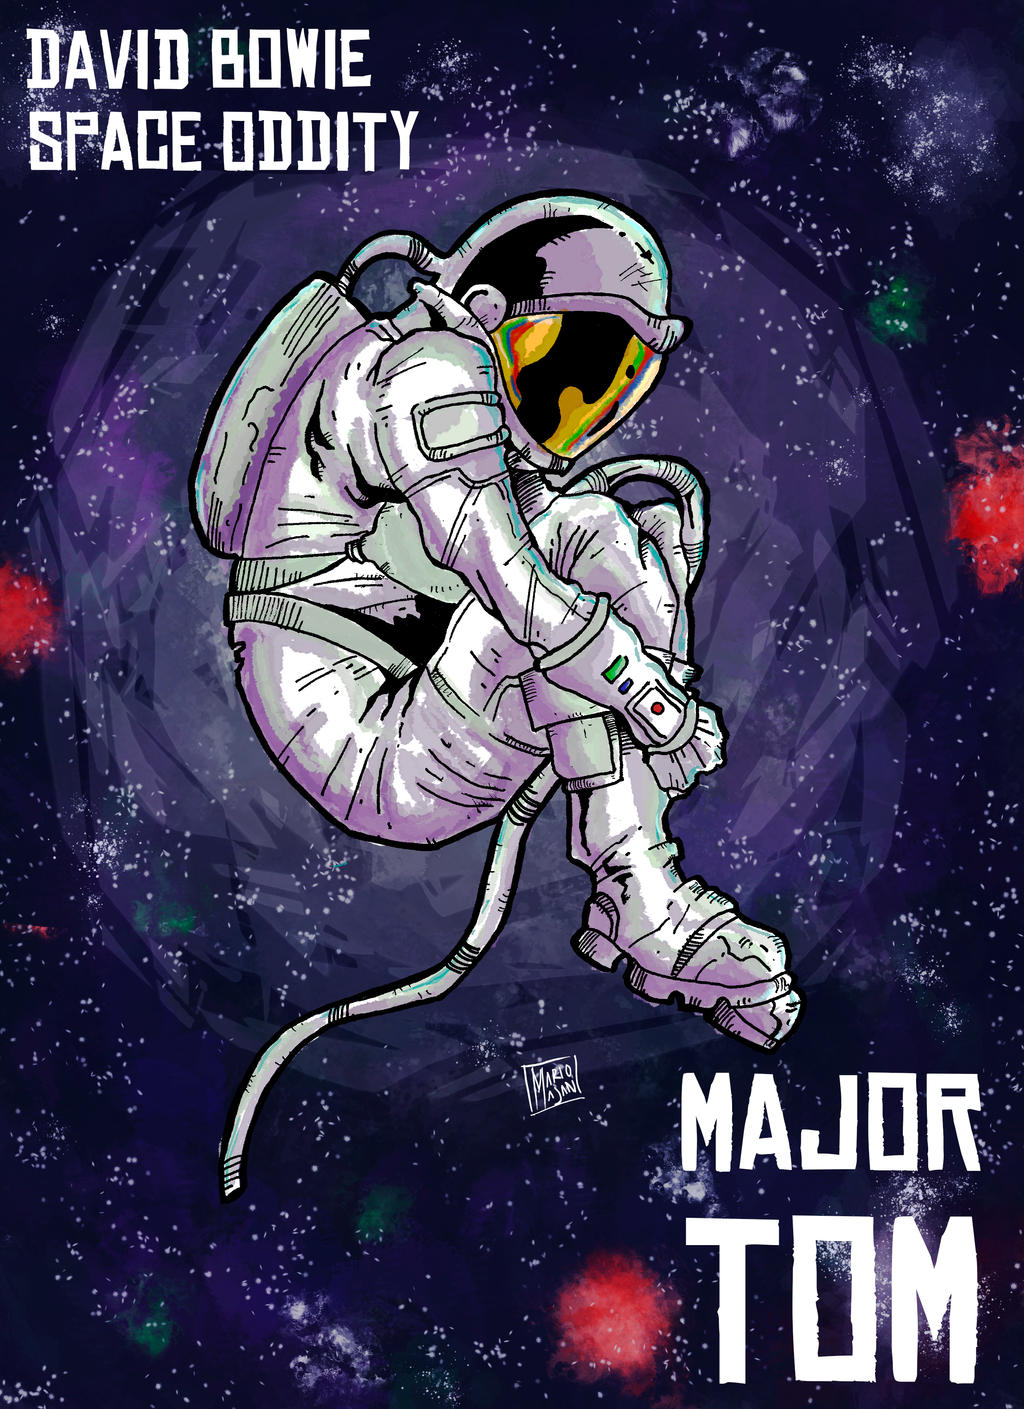 Major Tom by Chimy-The-Zombie on DeviantArt